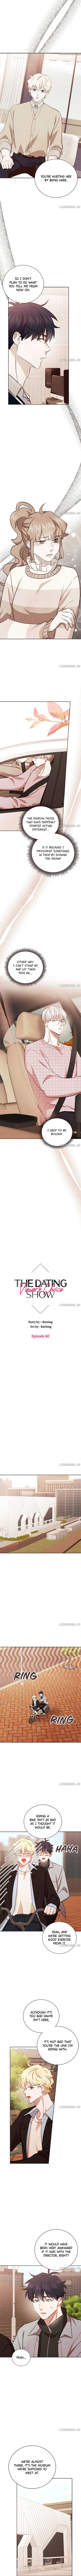 Viewer’S Choice: The Dating Show - 60 page 3-d9d7b4d0